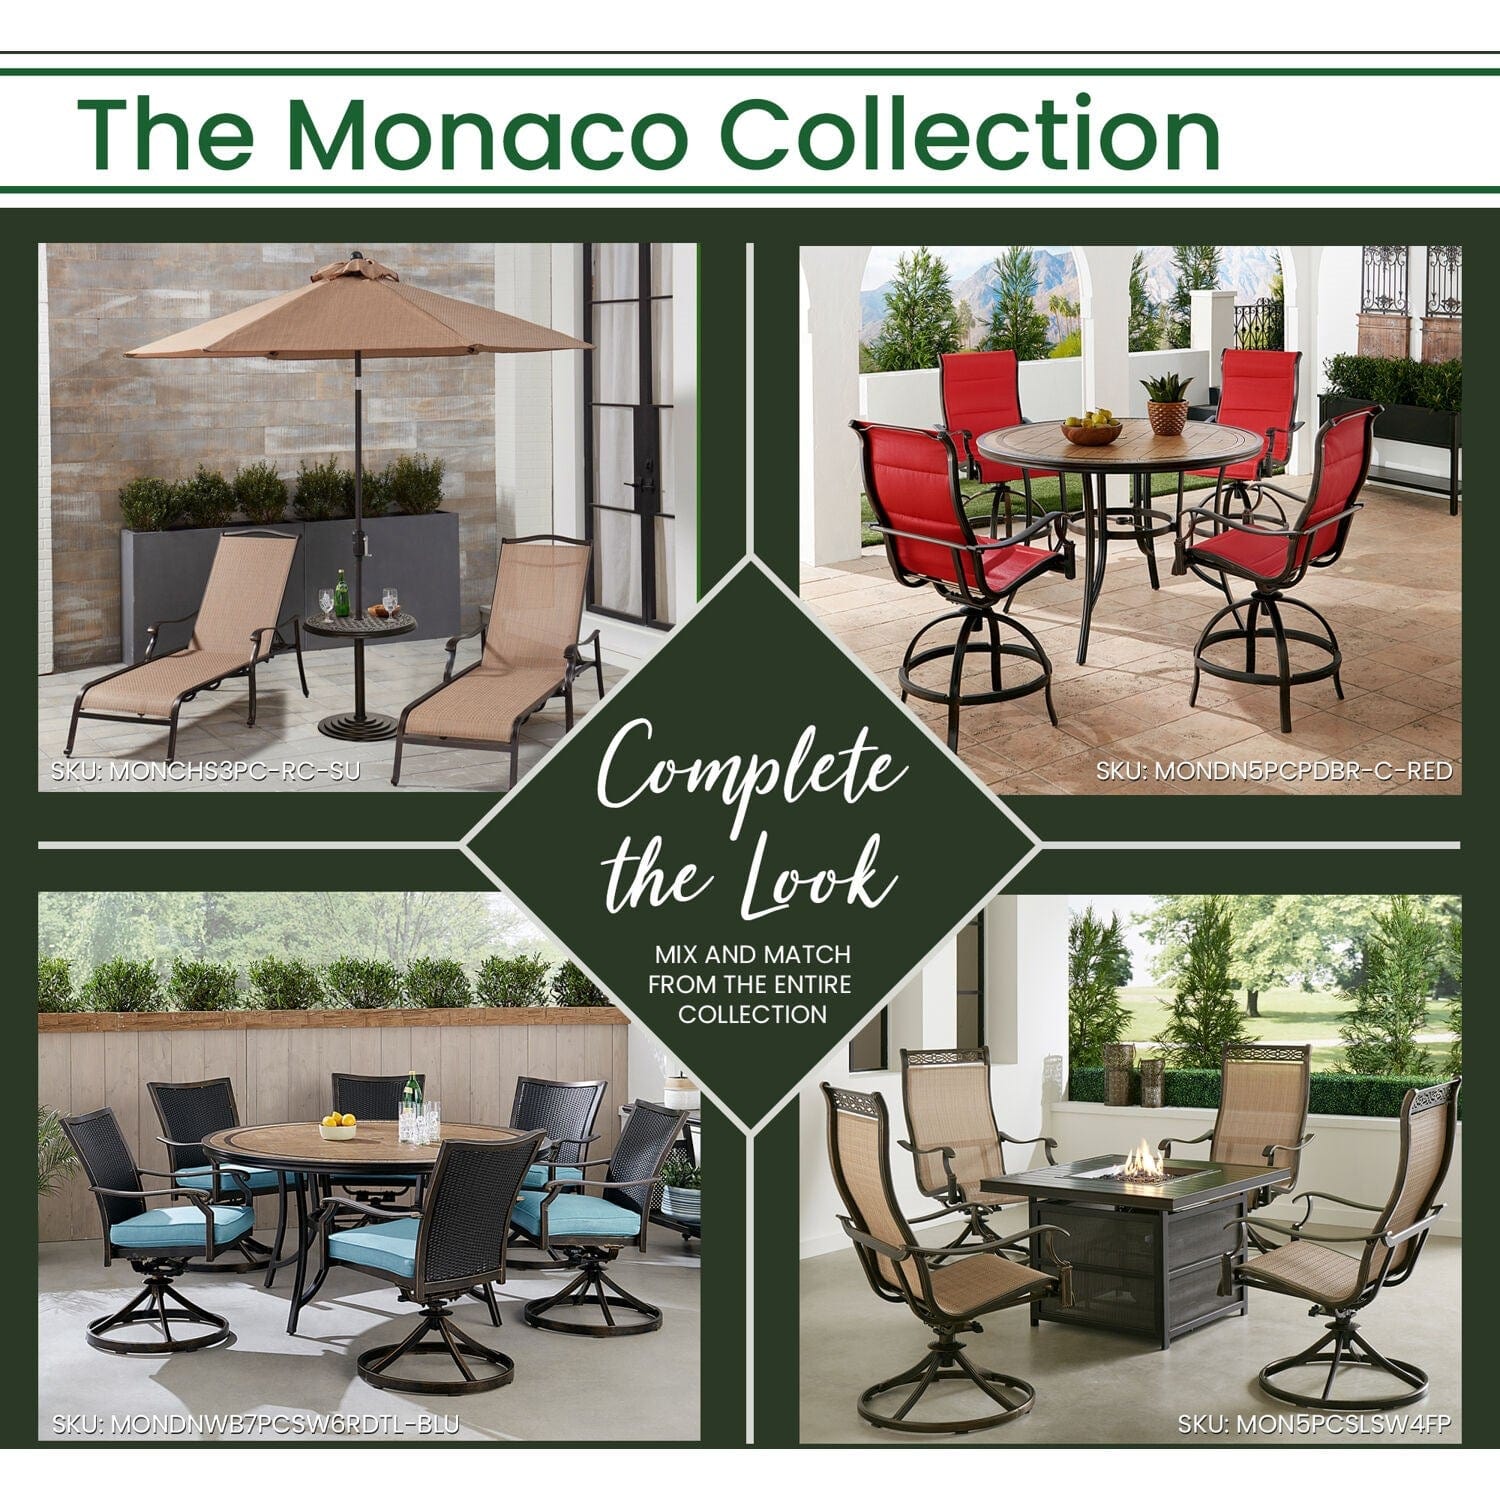 Hanover Outdoor Dining Set Hanover - Monaco 5-Piece Dining Set in Red with Four Swivel Rockers and a 51 In. Tile-Top Table | MONDN5PCSW-4-RED